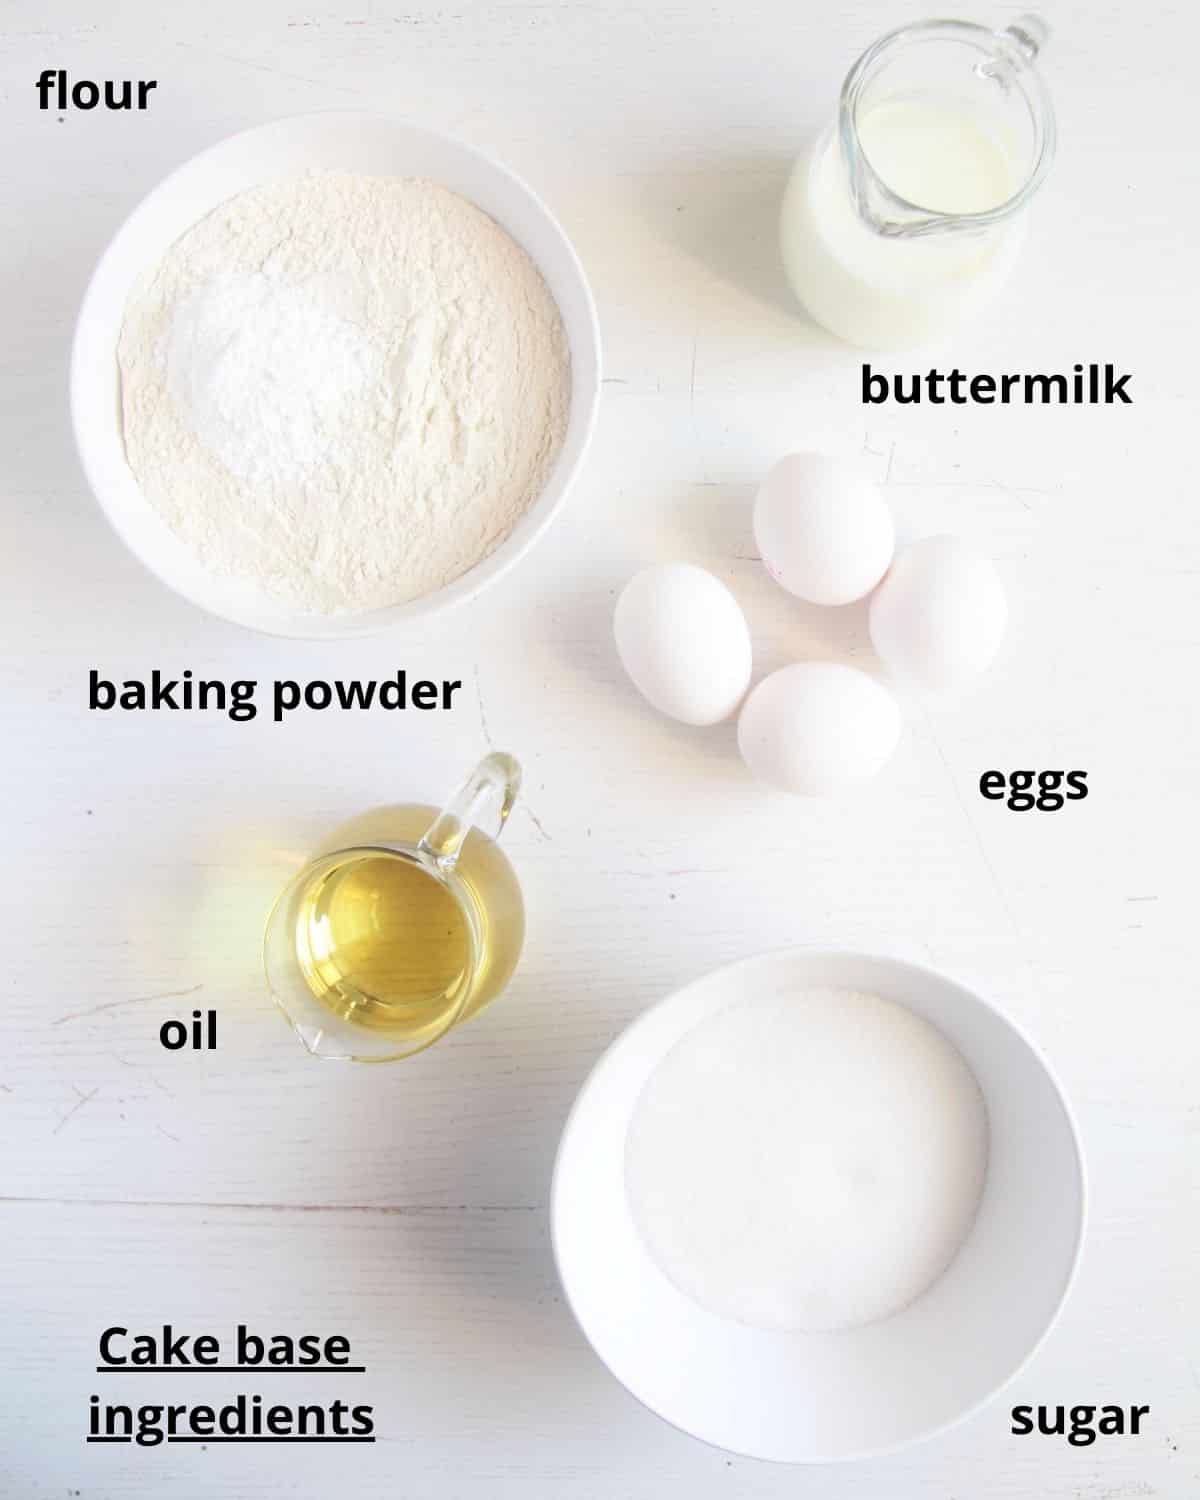 listed ingredients for making simple cake batter on a white table.